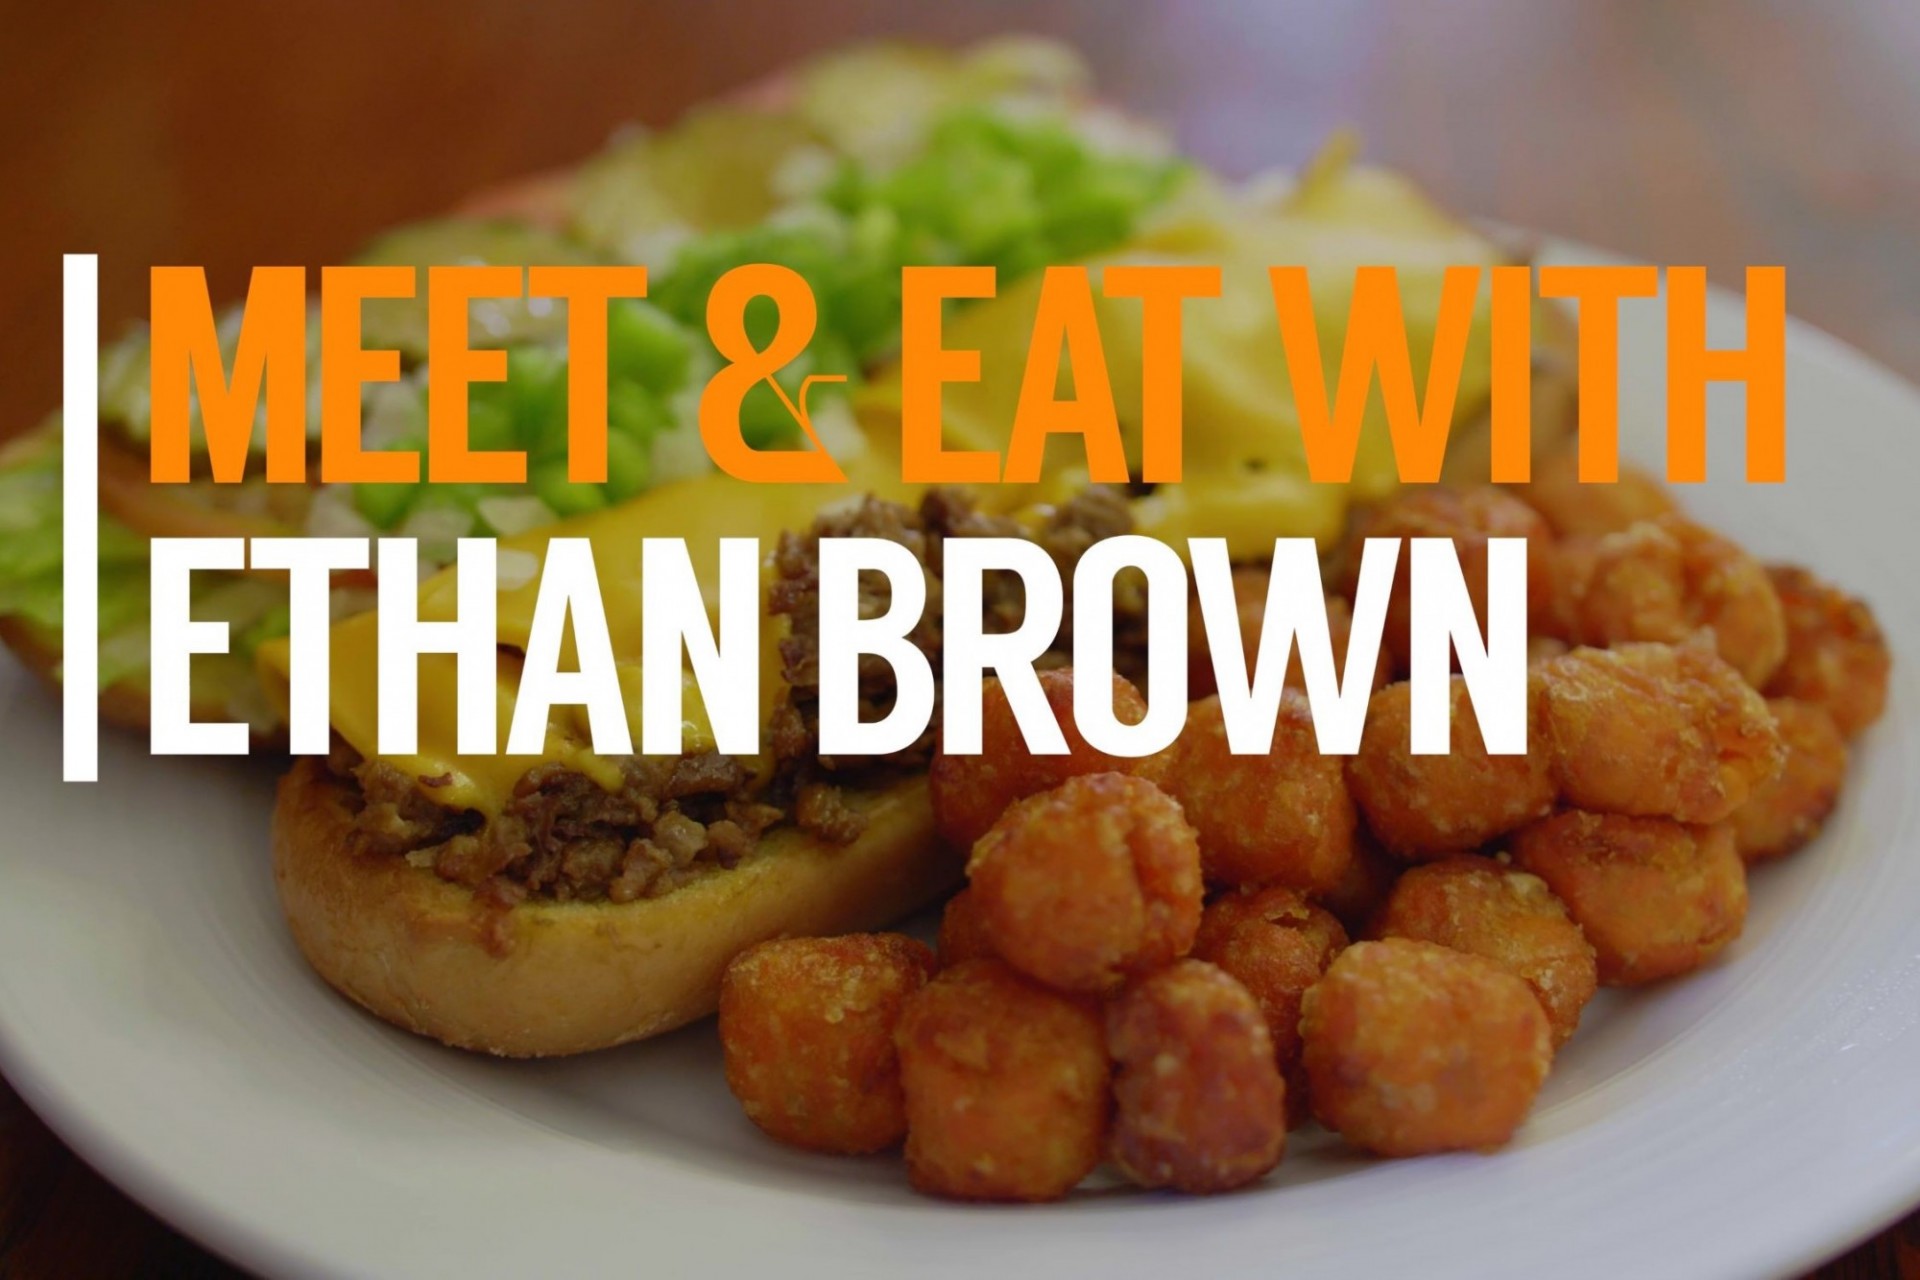 Meet and eat with Ethan Brown